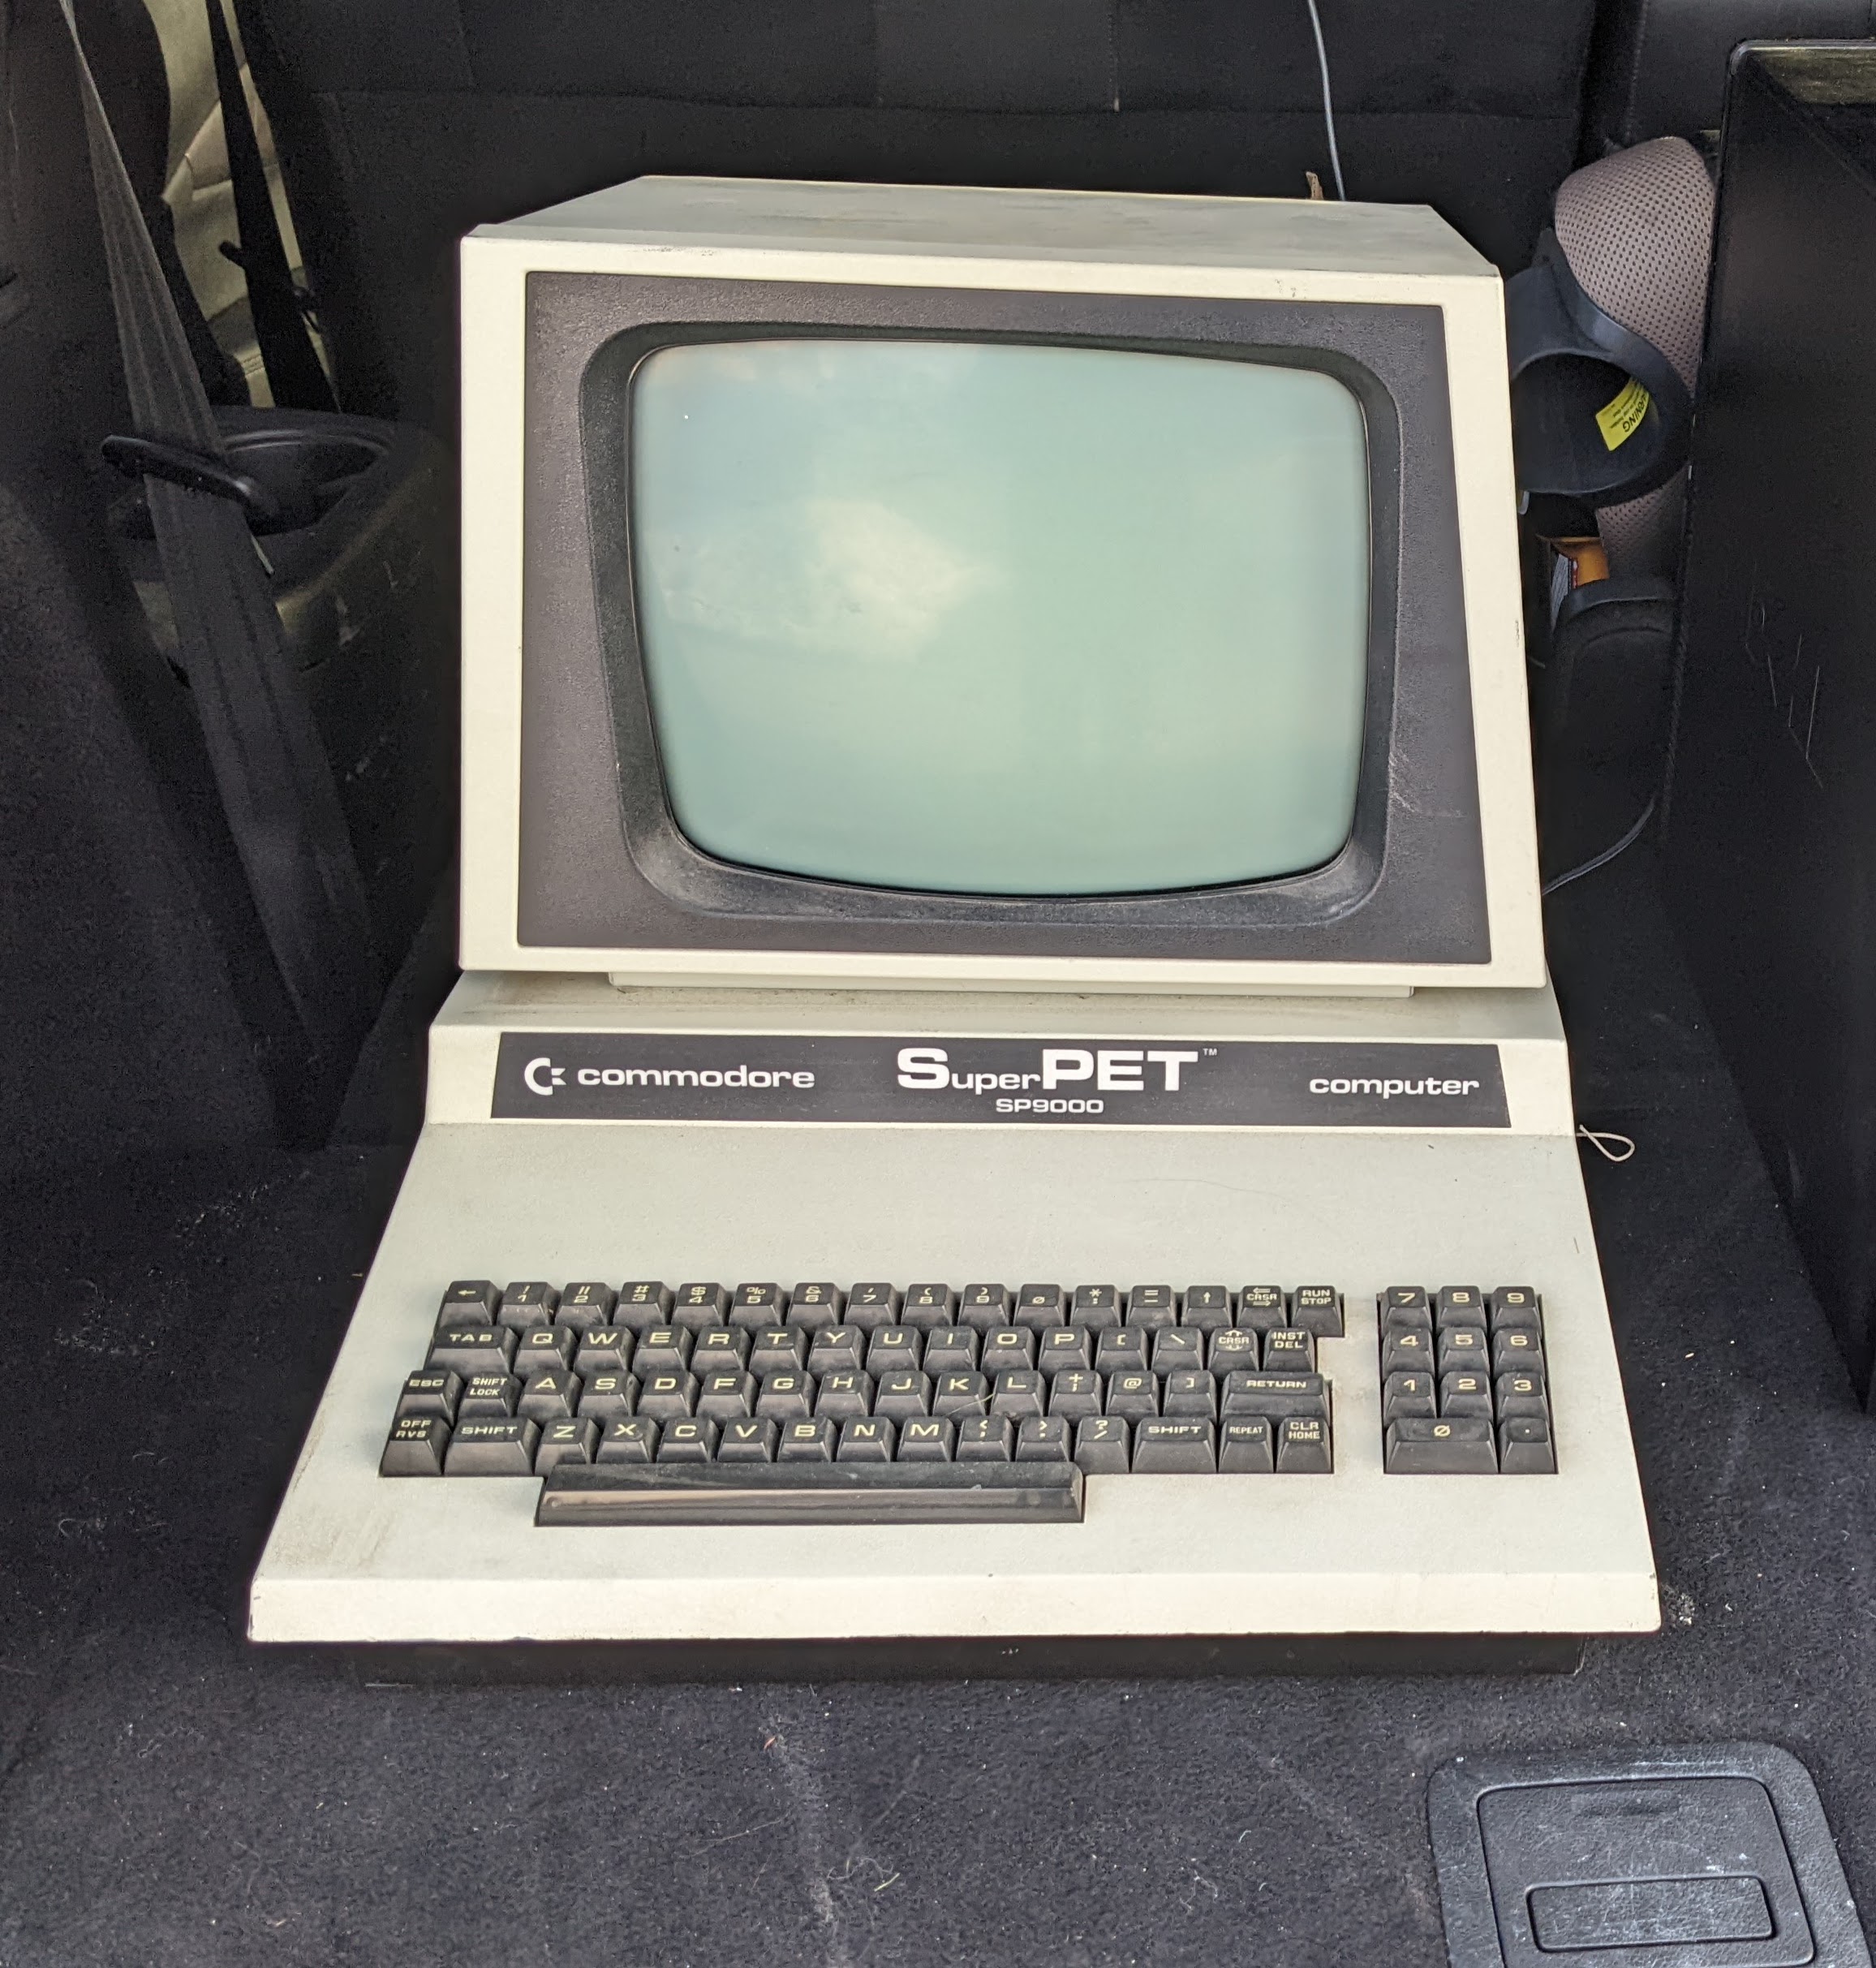 Commodore SuperPET computer with a keyboard and built in monitor, powered off